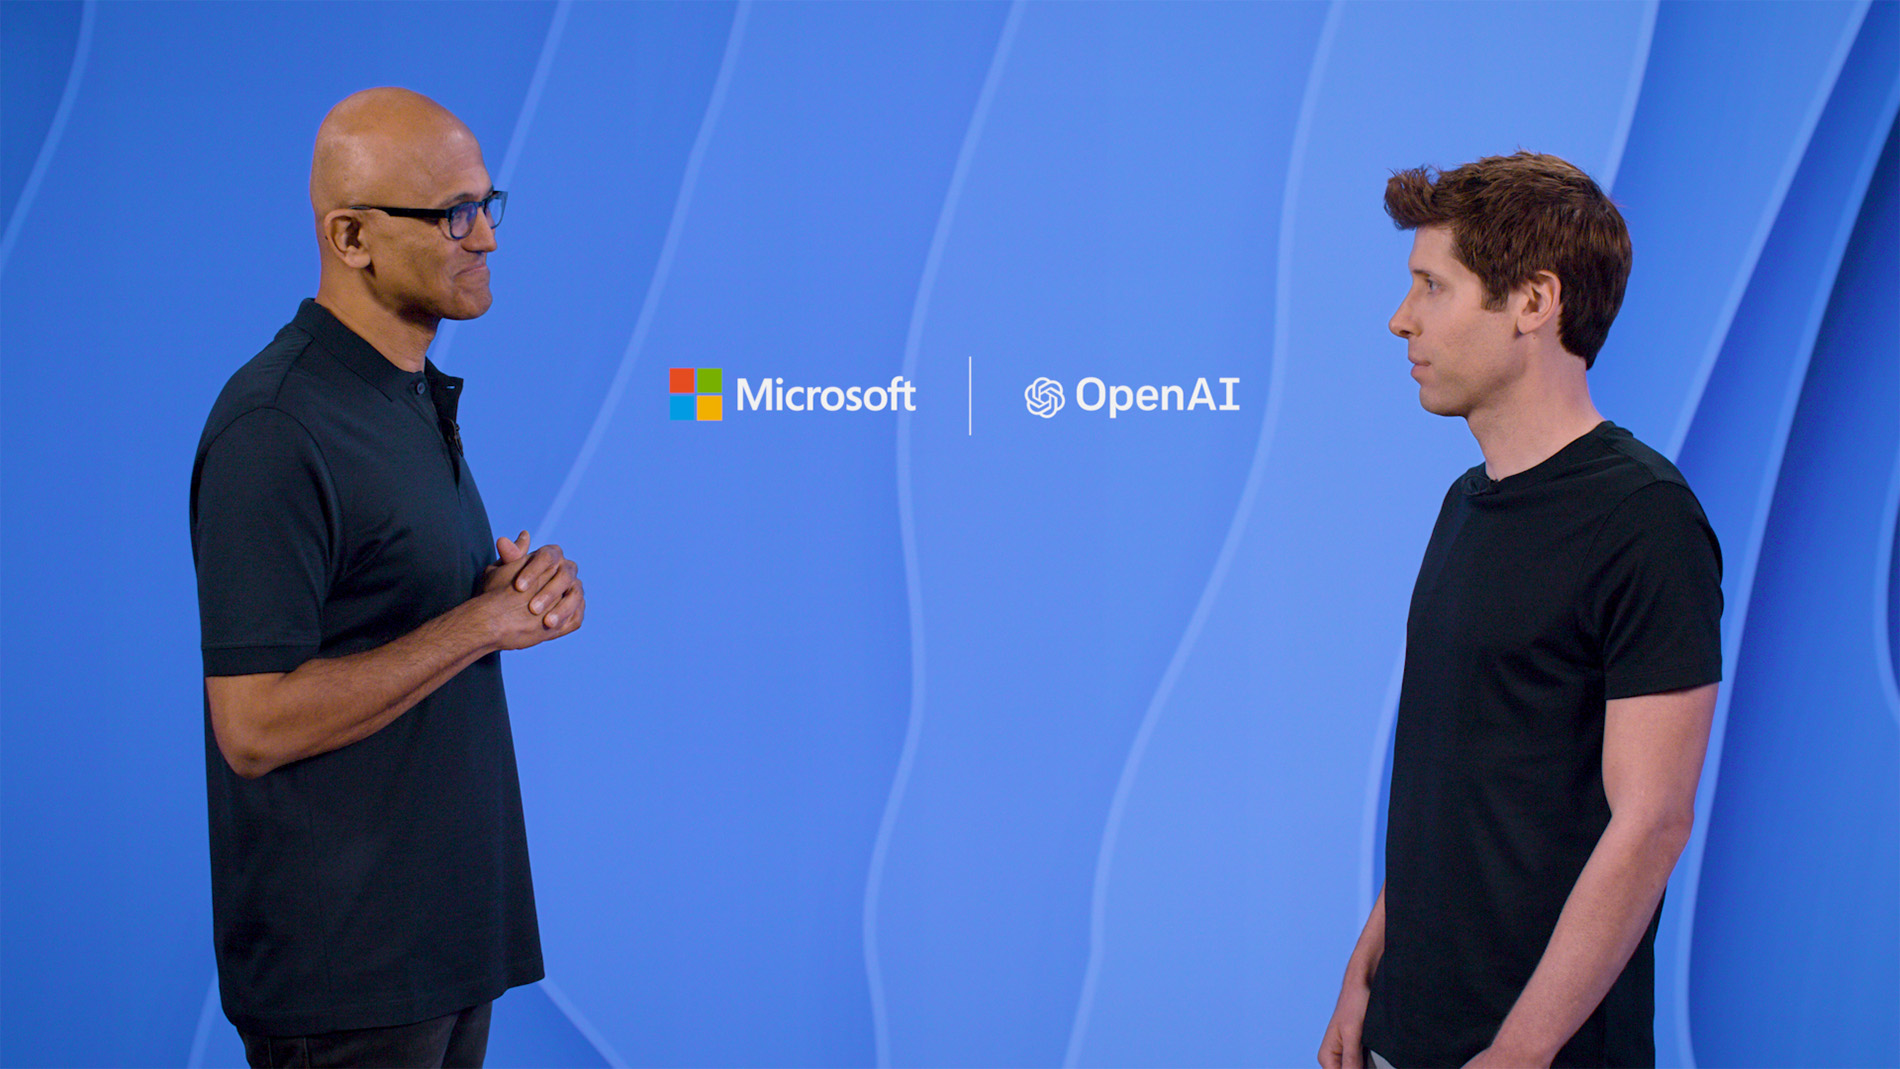 What is Microsoft Without OpenAI?